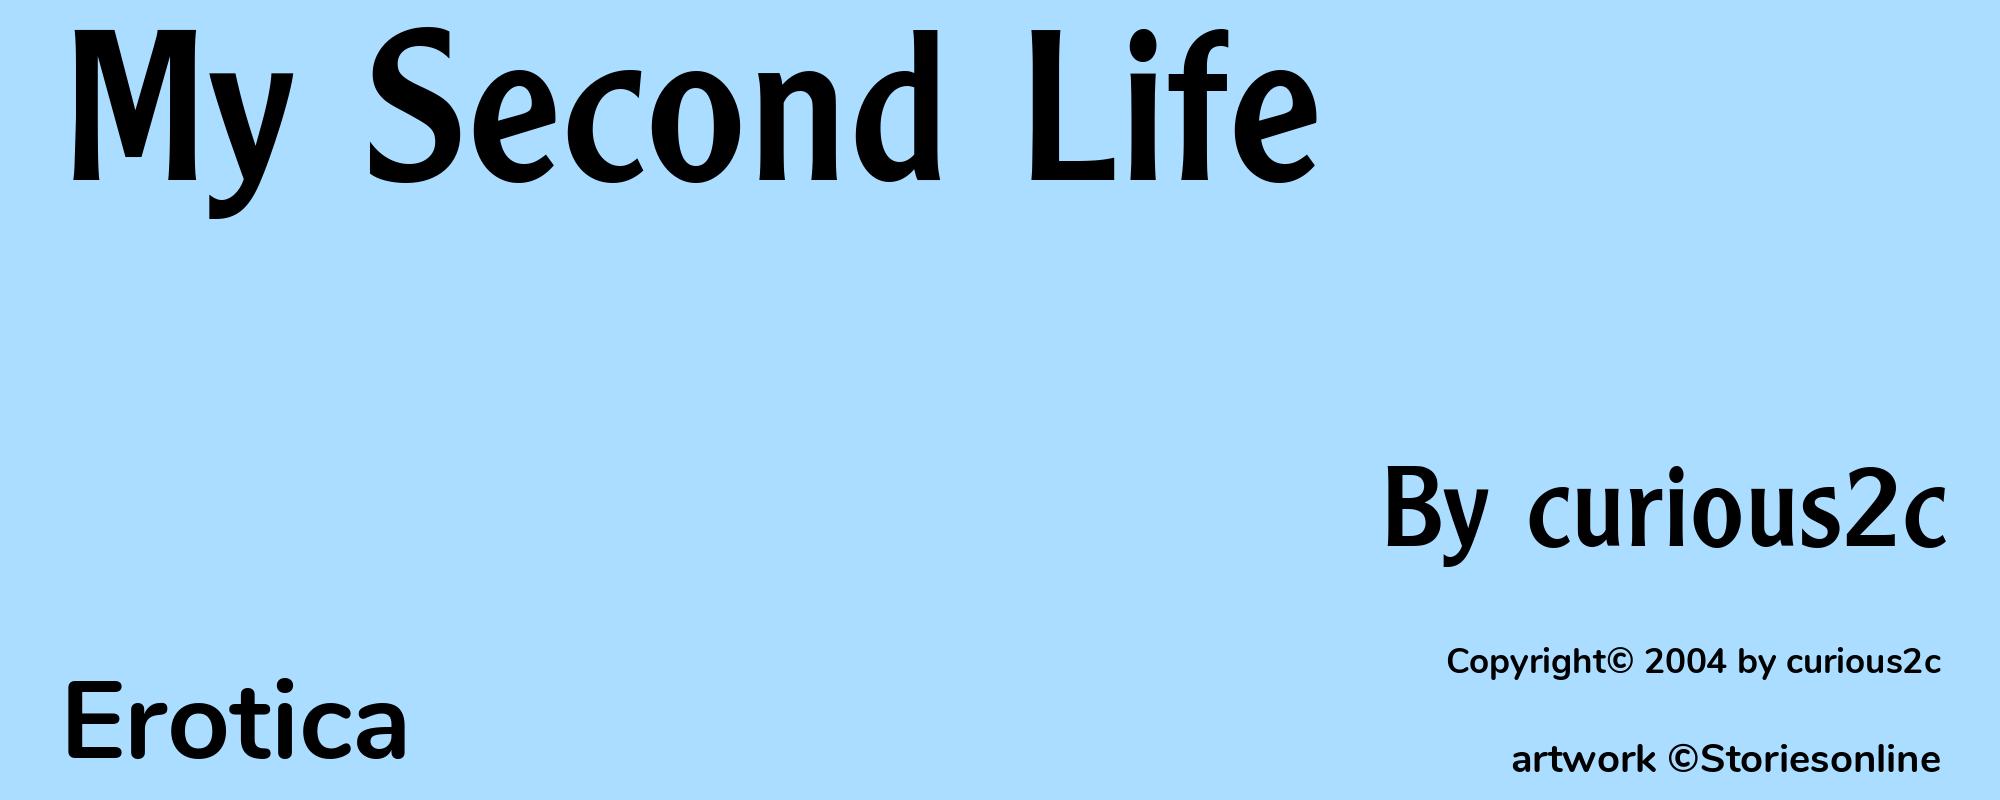 My Second Life - Cover